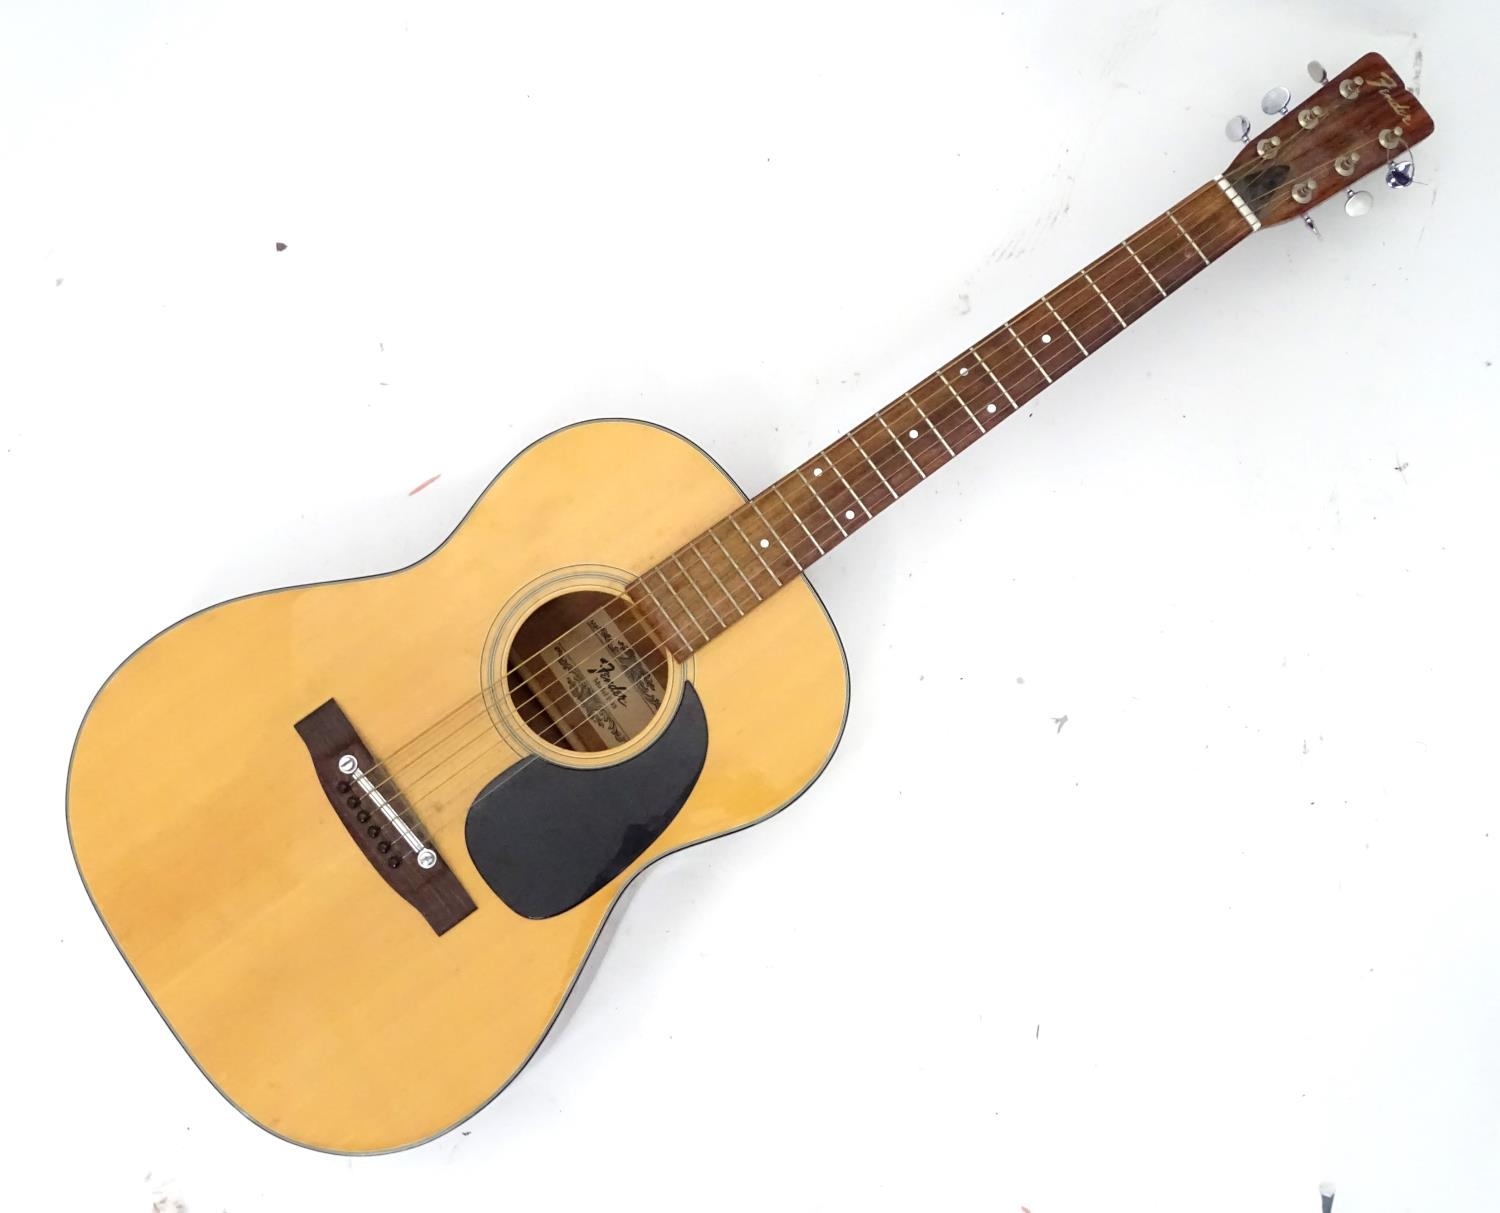 A 1975 Fender model F15 acoustic guitar Please Note - we do not make reference to the condition of